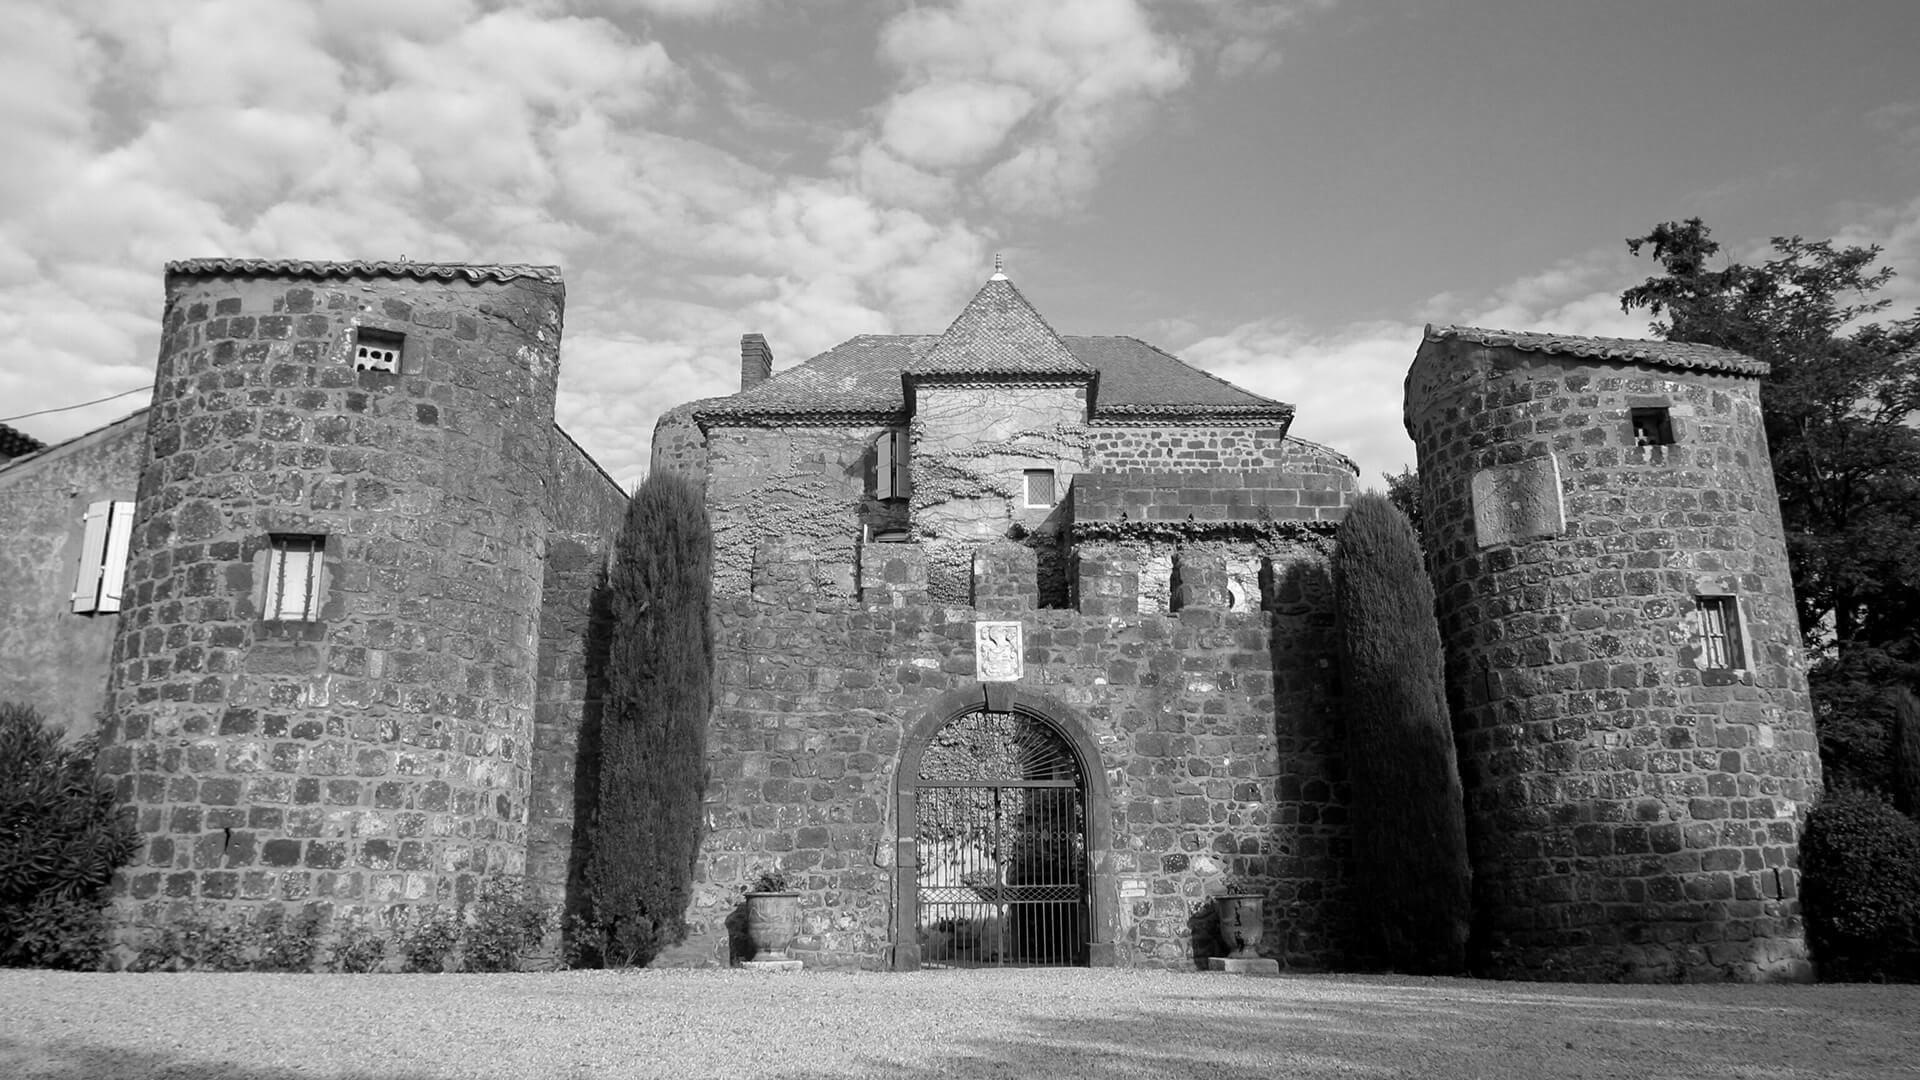 Image of Chateau Morere